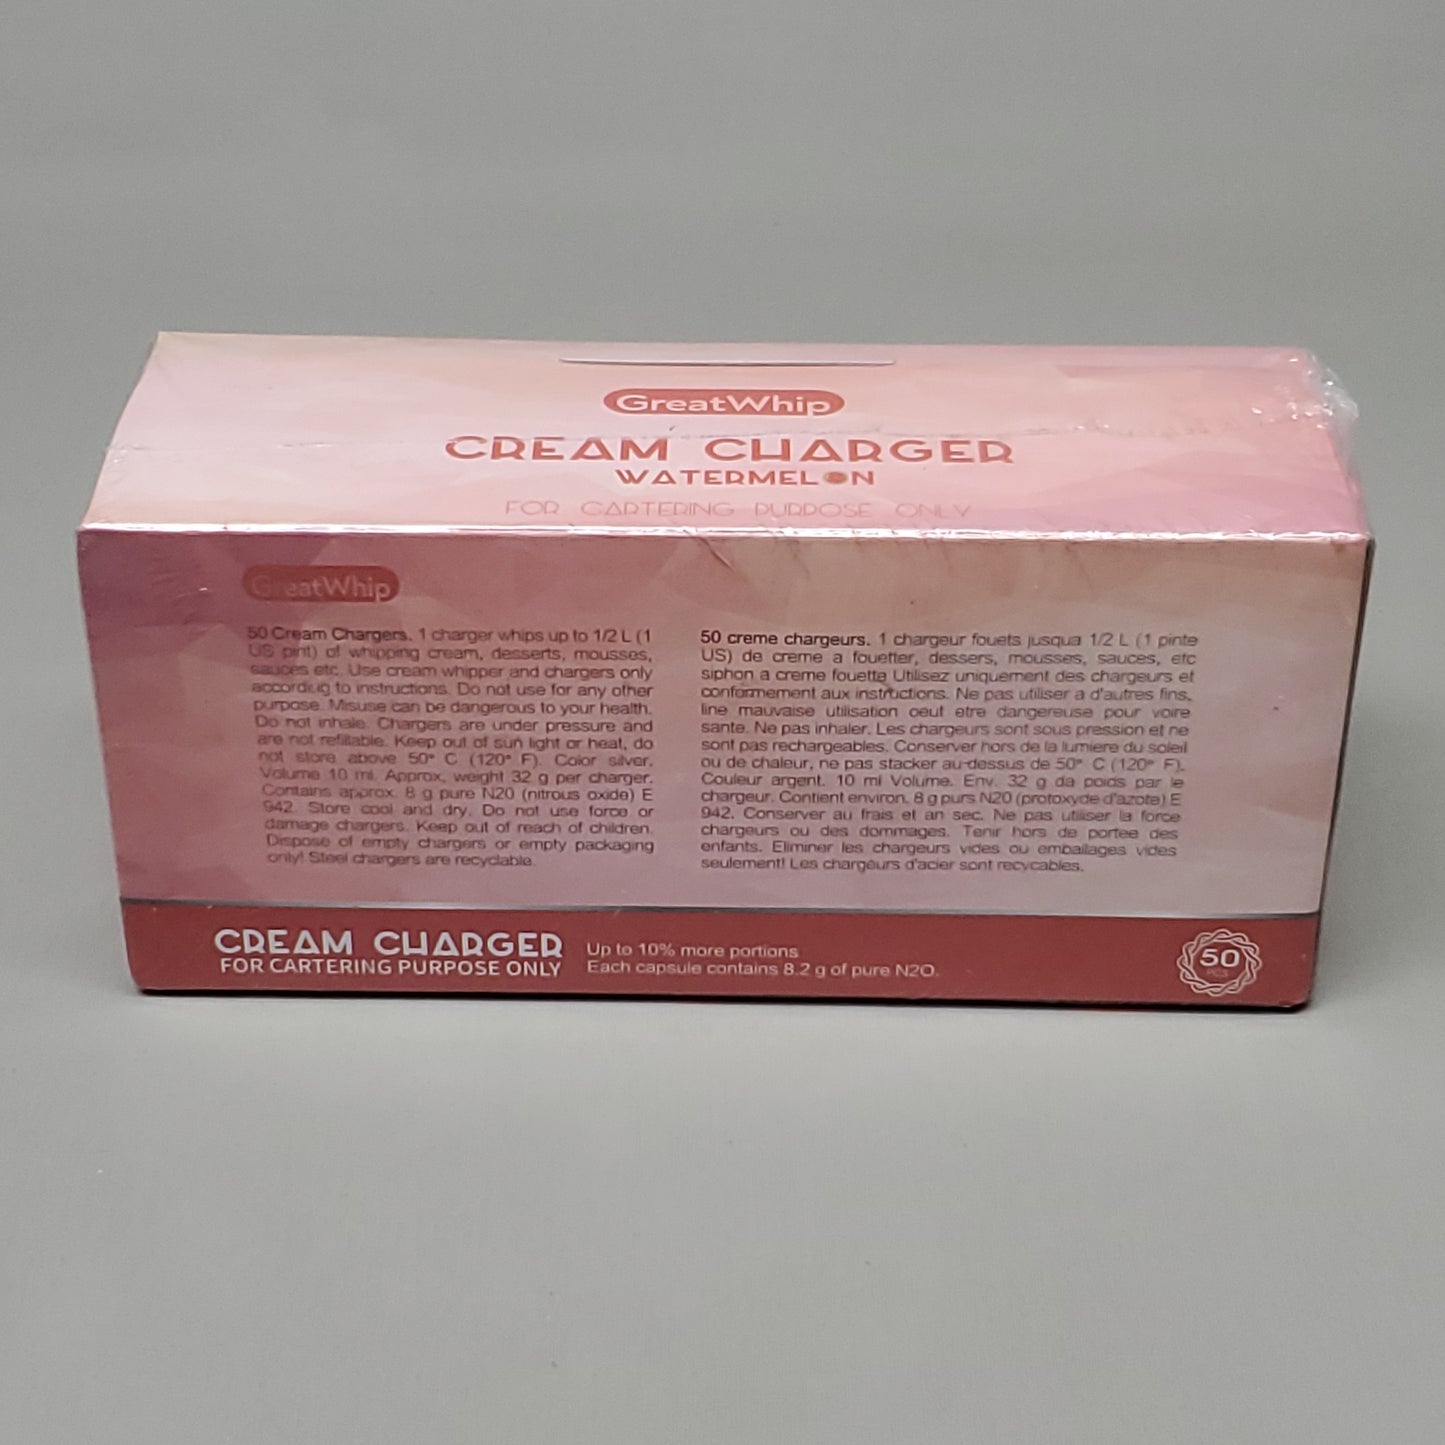 GREATWHIP Watermelon Cream Chargers 50 Pack Best By 08/26